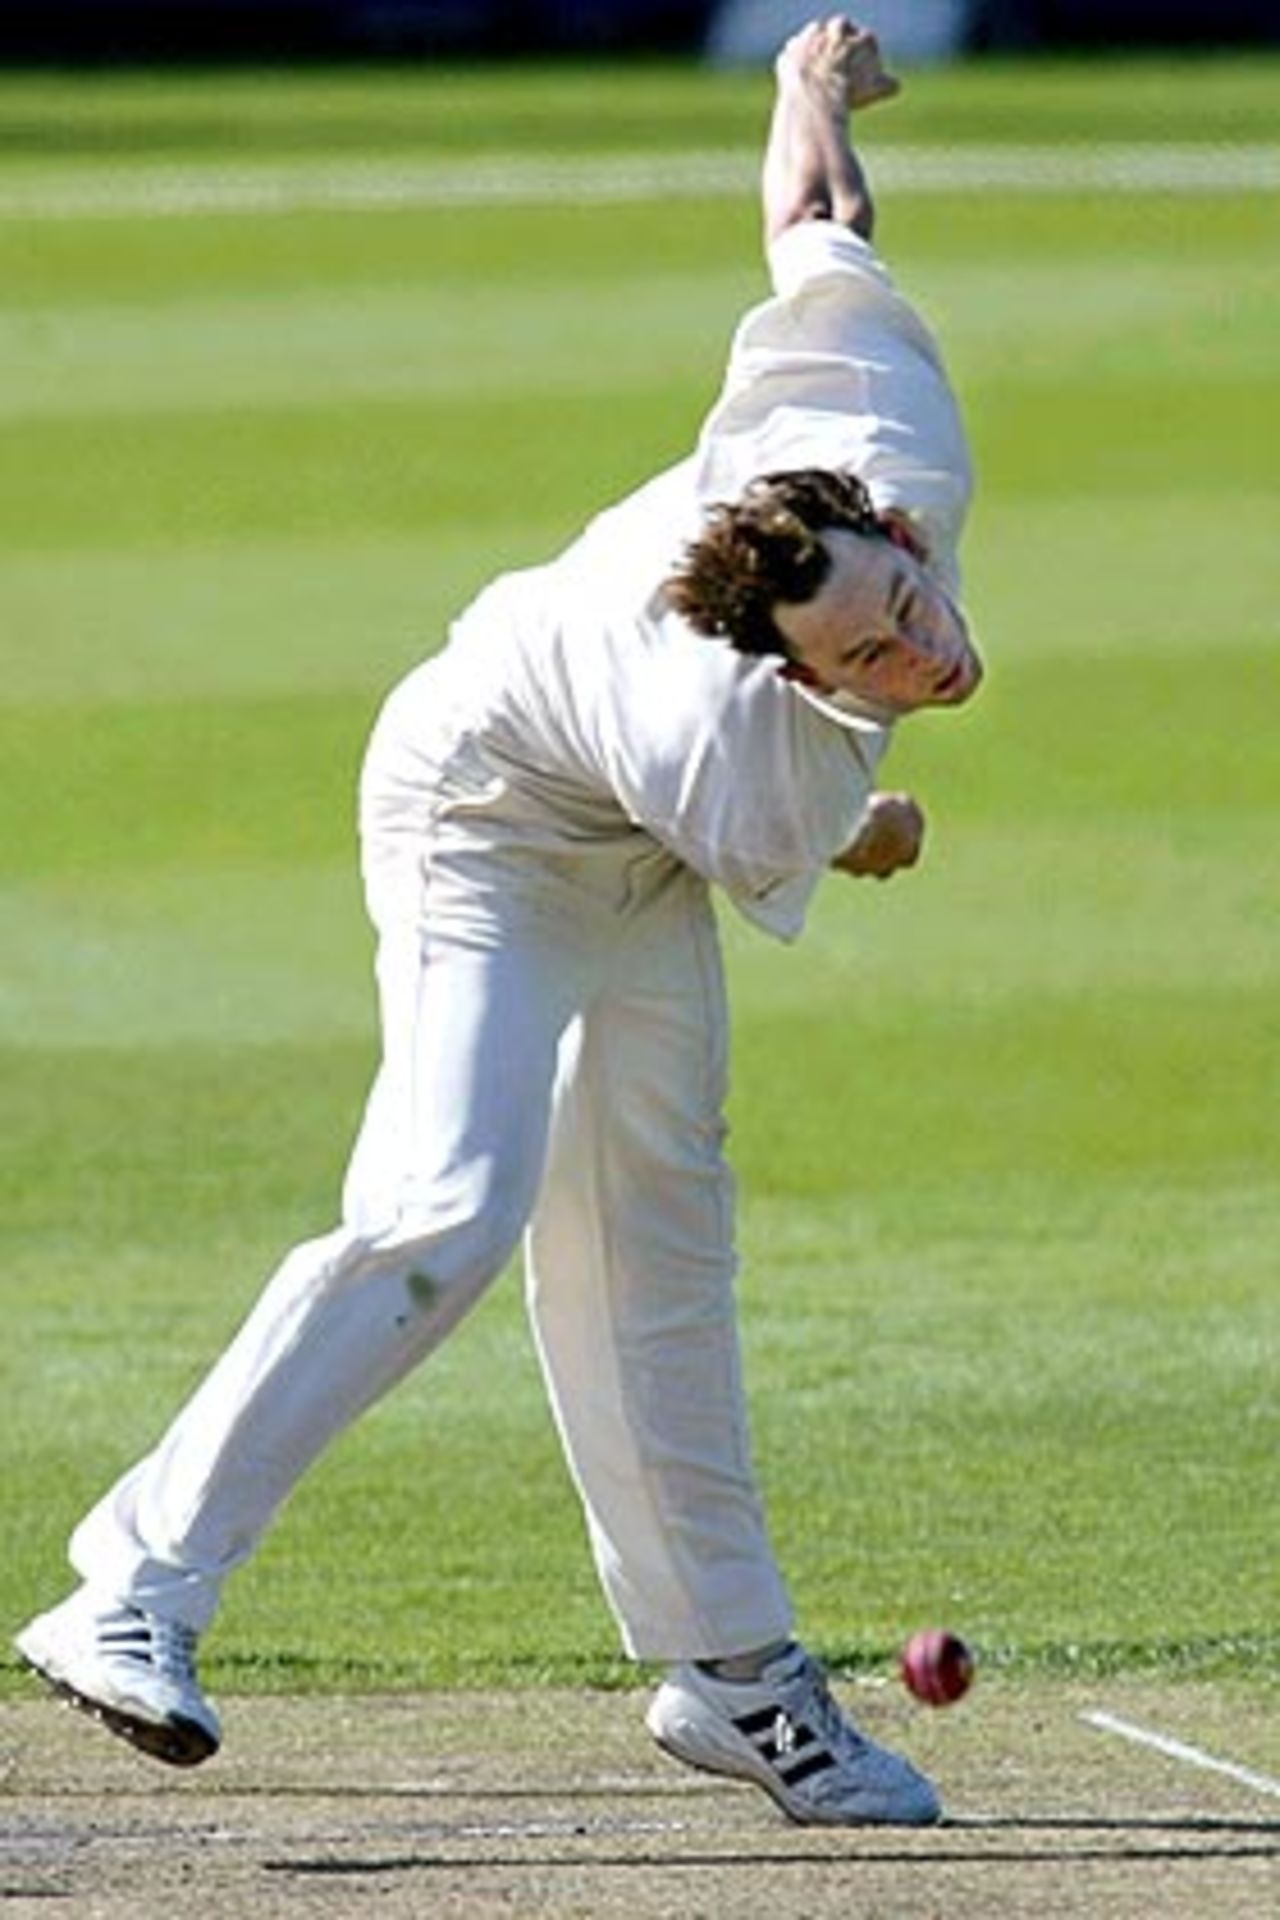 Matthew Nicholson puffs, on his way to blowing the house down in India's first innings, Australia A v Indians, tour game, Hobart, 2nd day, December 20, 2003